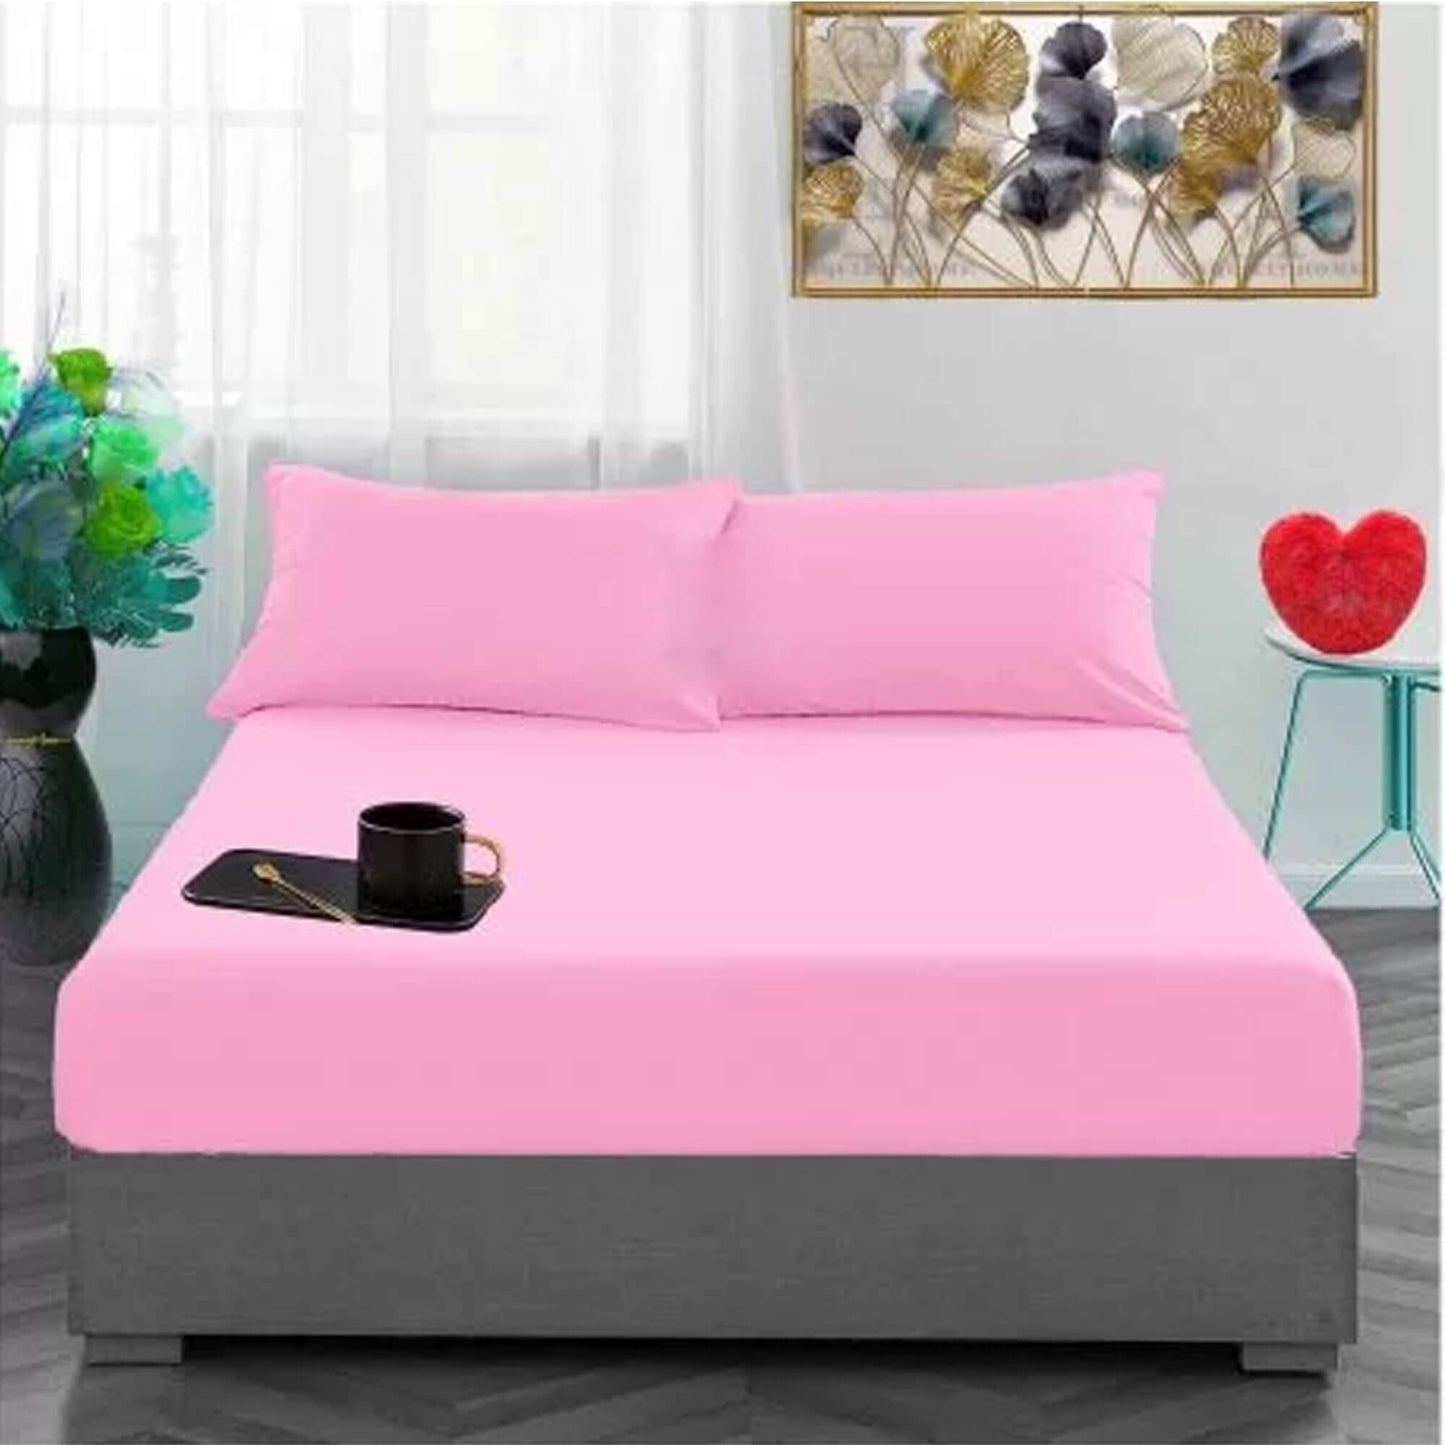 Small Double Fitted Sheet 100% Brushed Cotton Bed Sheet - TheComfortshop.co.ukBed Sheets0721718977285thecomfortshopTheComfortshop.co.ukFlannelette FIT Pink 4FT-1Pink4FT Small DoubleSmall Double Fitted Sheet 100% Brushed Cotton Bed Sheet - TheComfortshop.co.uk